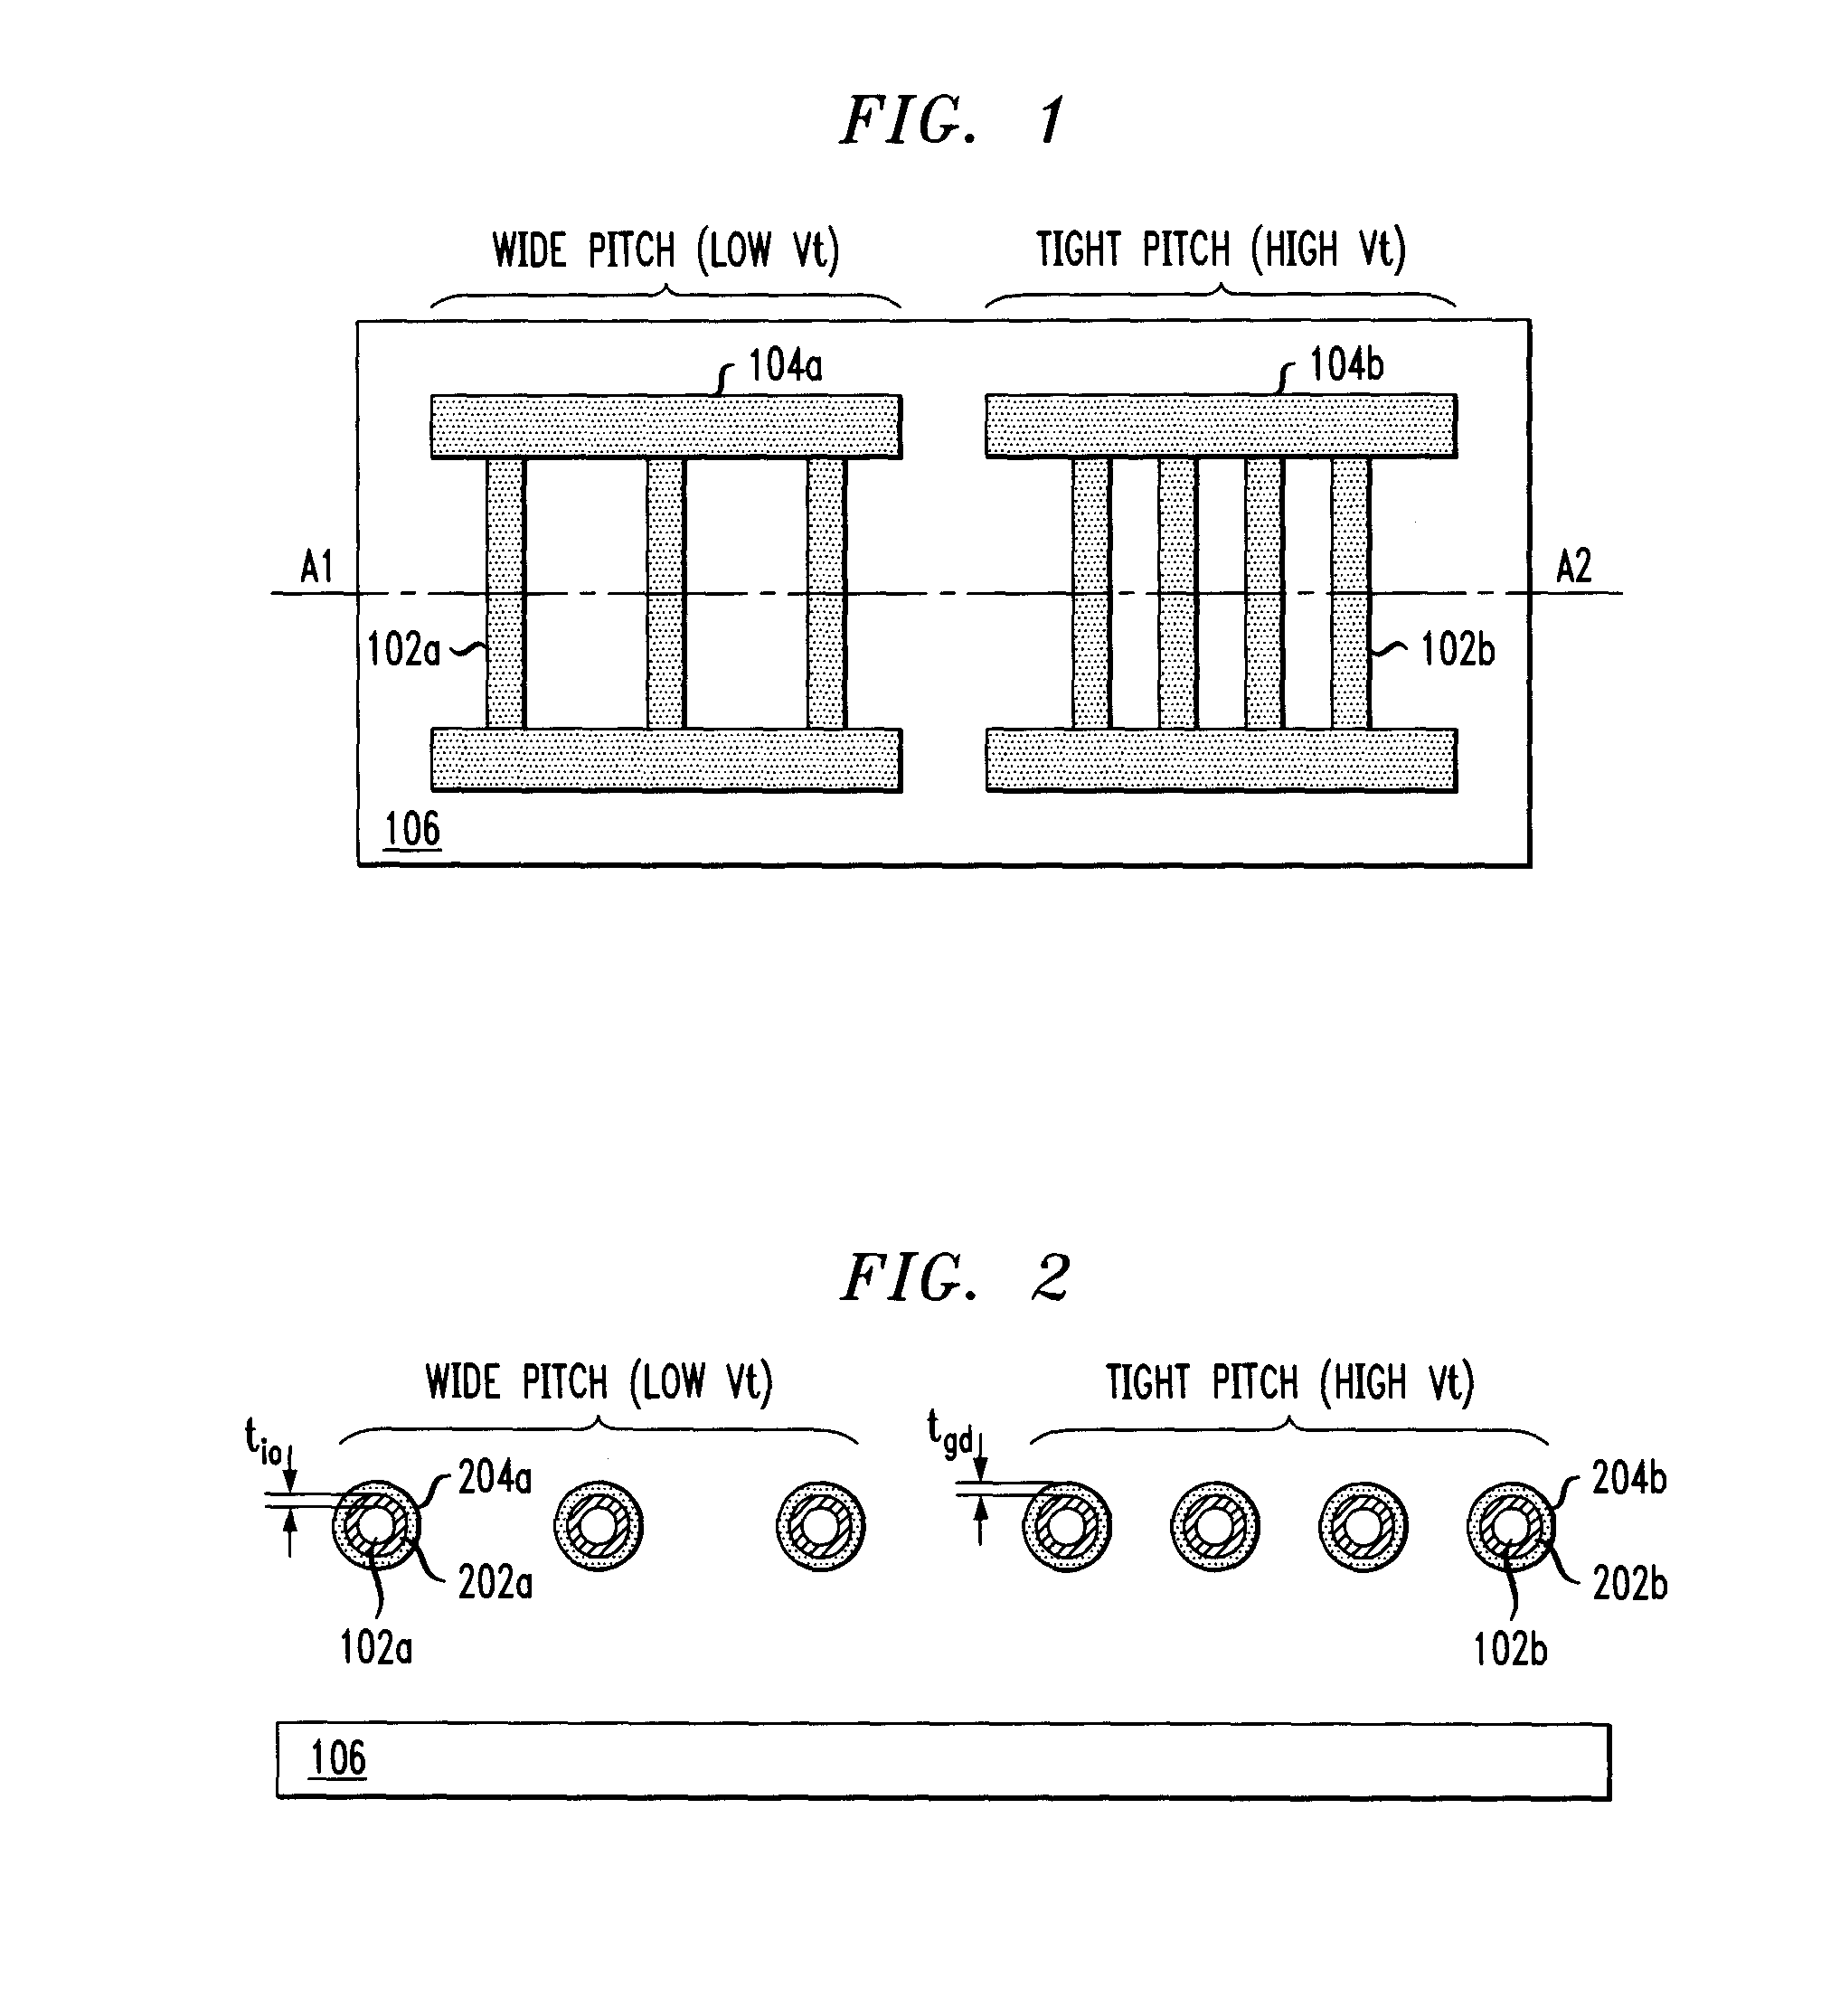 Techniques for Metal Gate Work Function Engineering to Enable Multiple Threshold Voltage Nanowire FET Devices